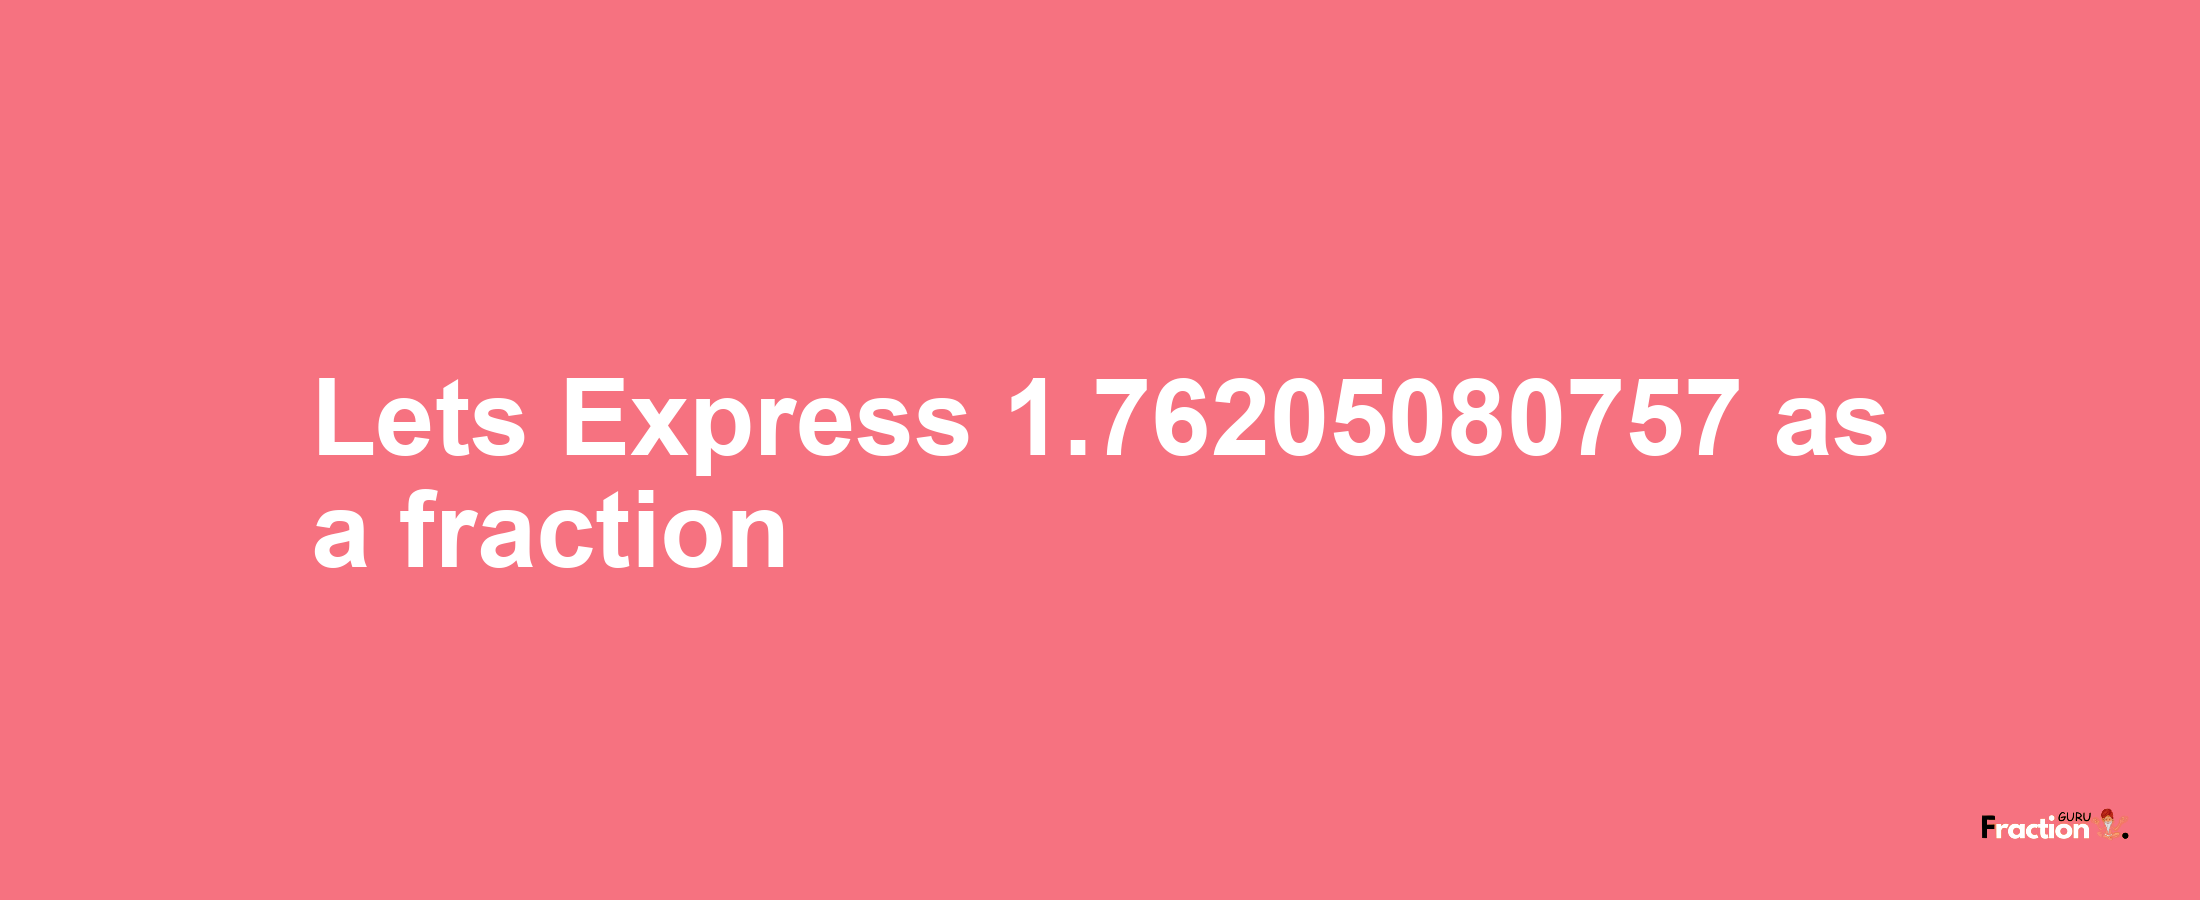 Lets Express 1.76205080757 as afraction